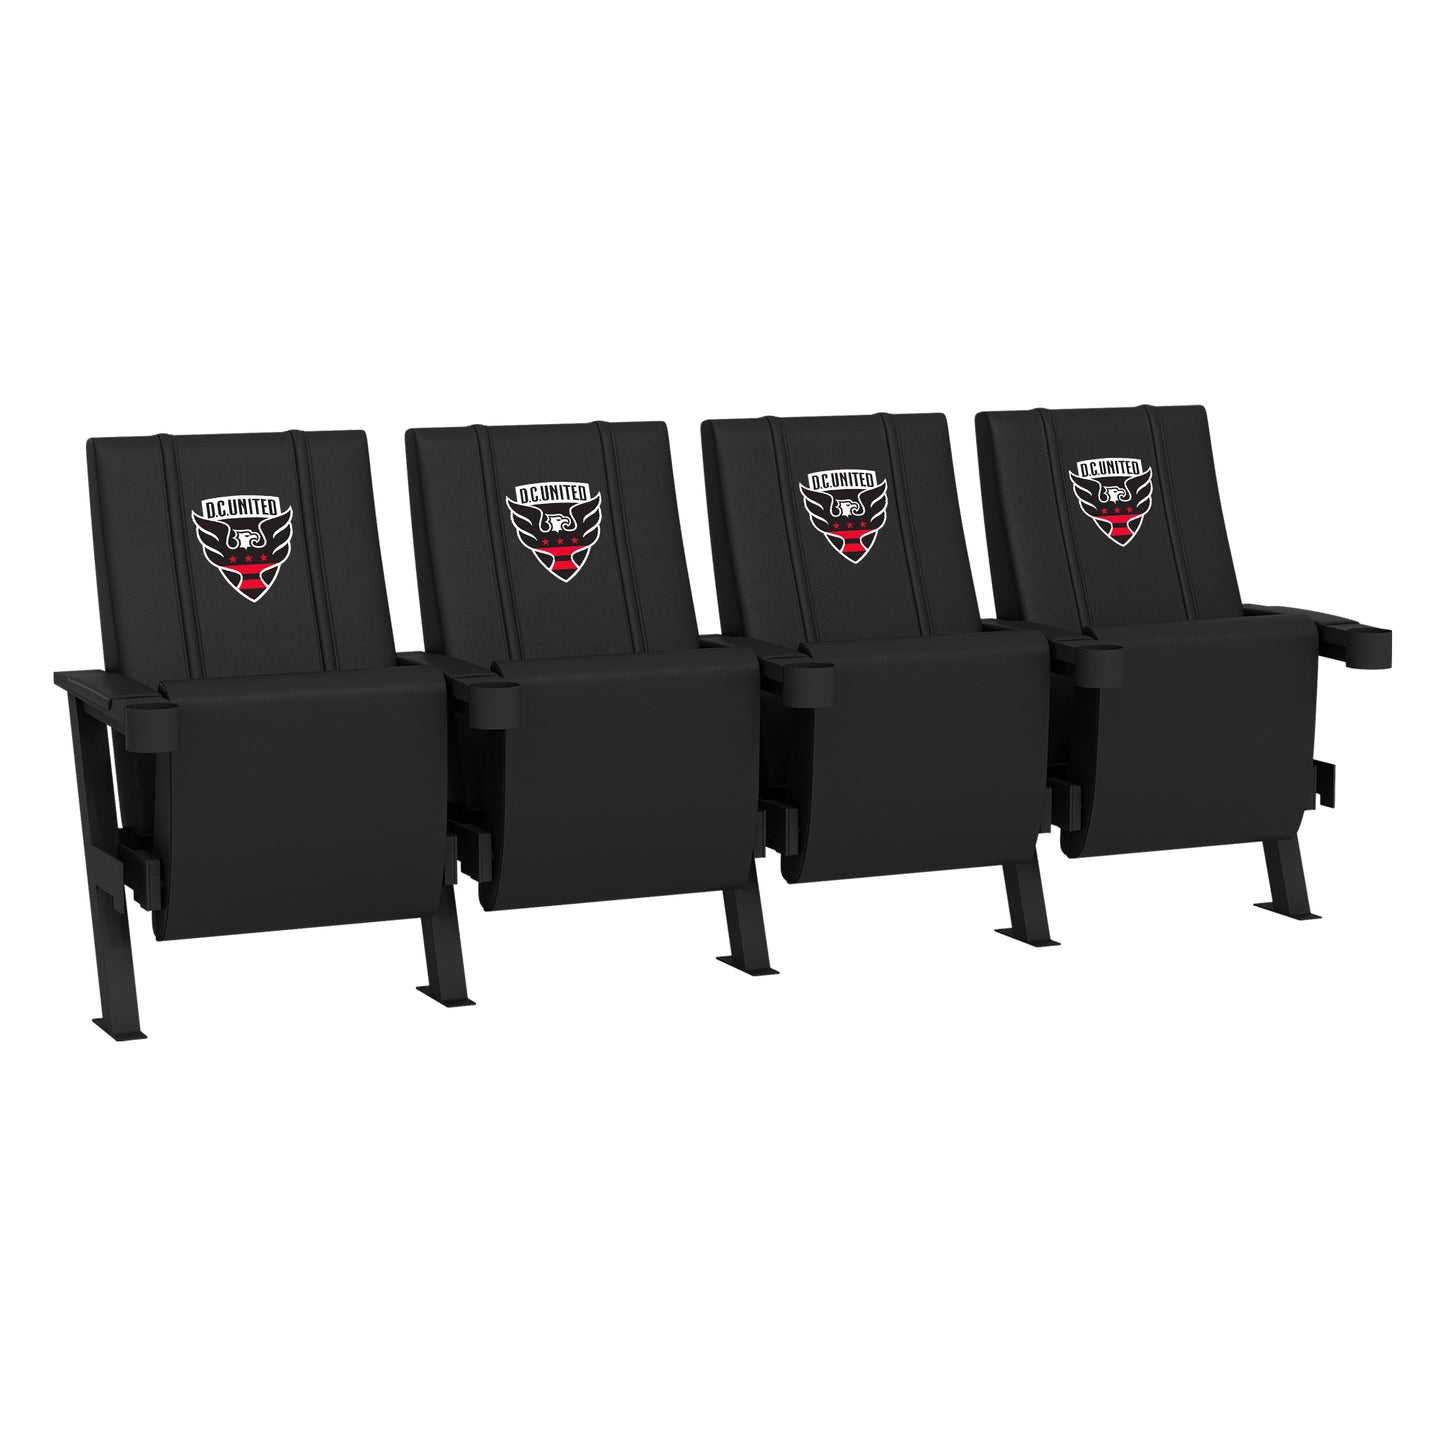 SuiteMax 3.5 VIP Seats with DC United FC Logo